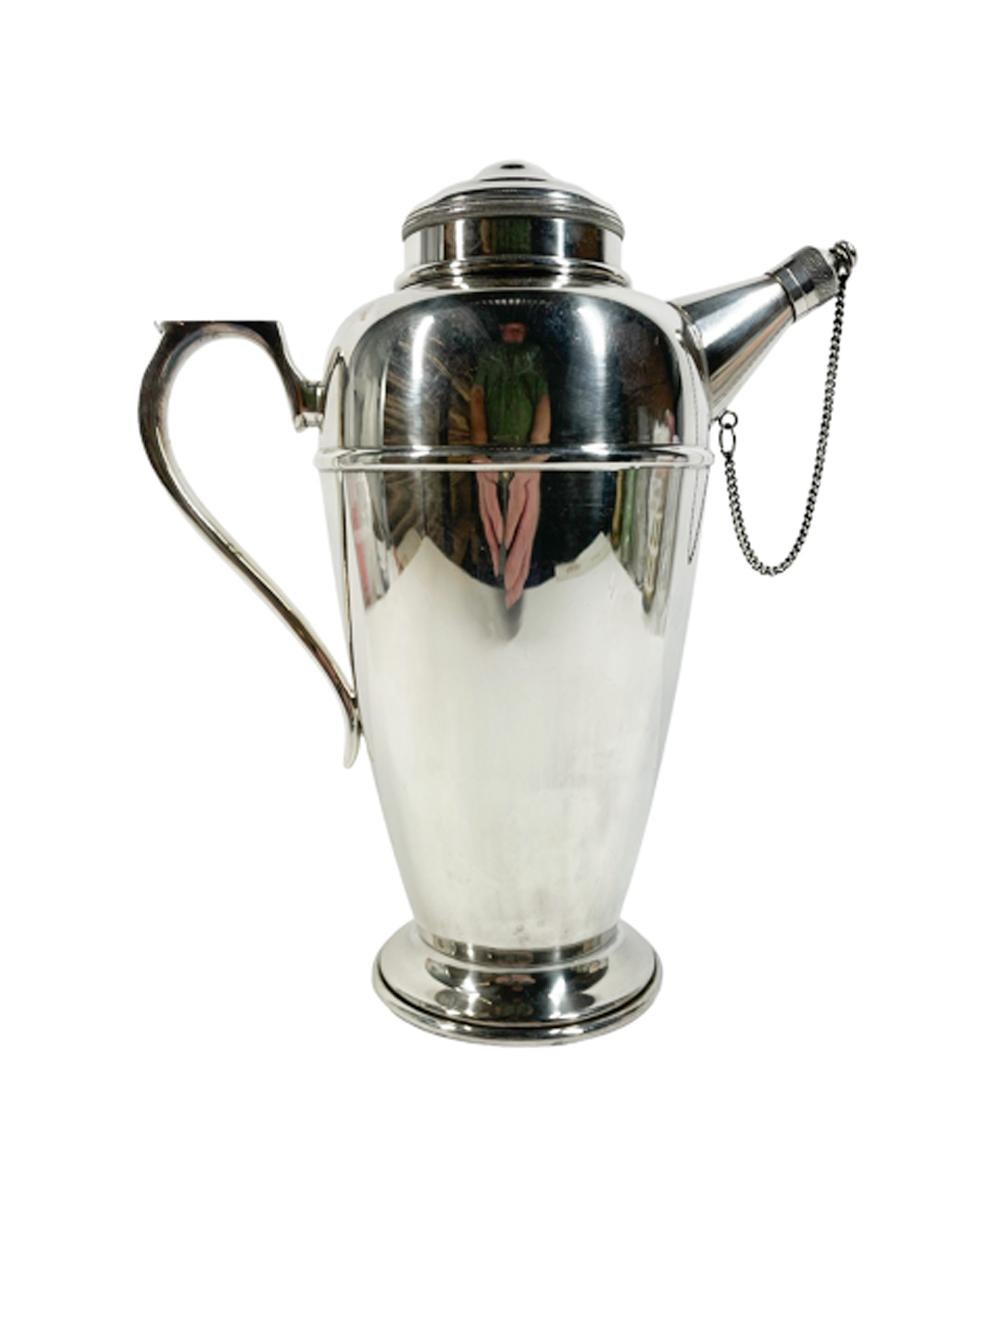 Art Deco silver plate cocktail shaker of tapered bulbous form with a scrolled handle and tapered spout with screw cap attached by chain, marked 